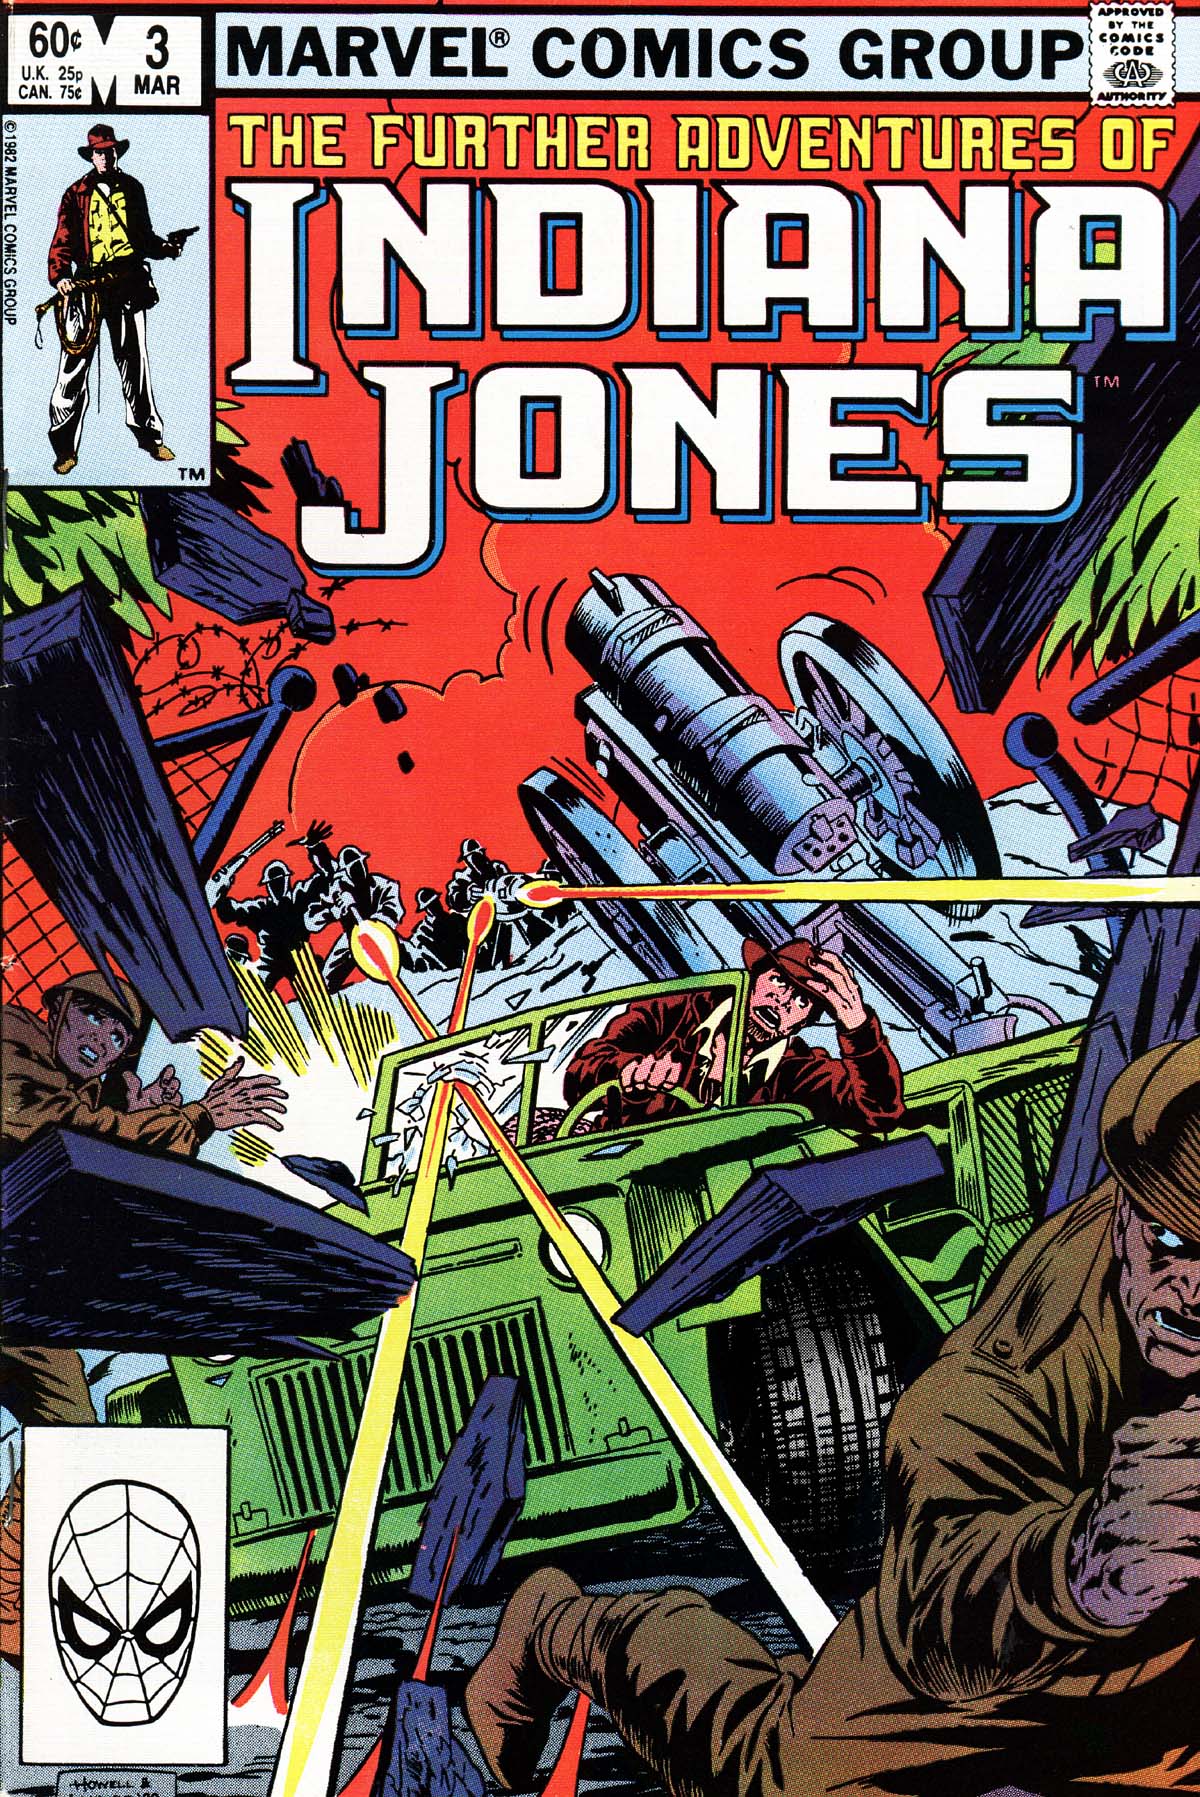 Read online The Further Adventures of Indiana Jones comic -  Issue #3 - 1